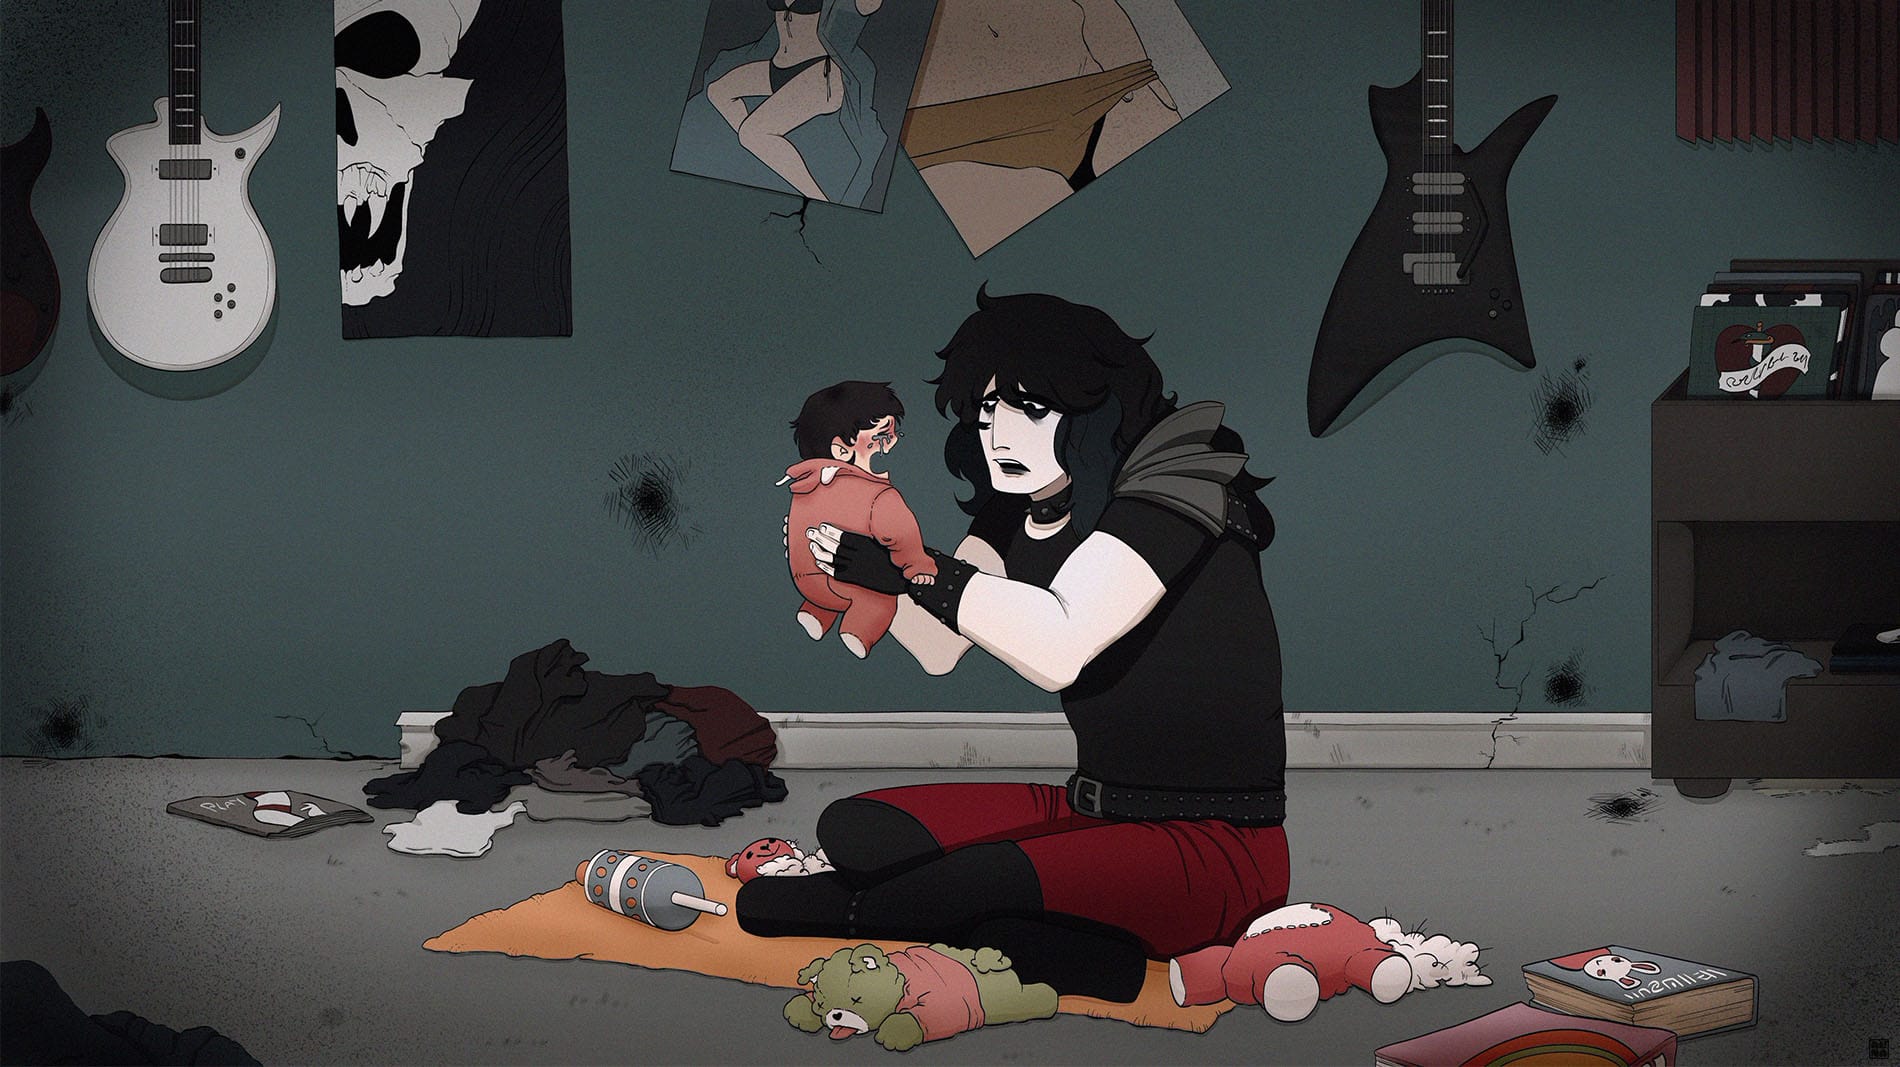 Editorial illustration of a hair metal rocker struggling to figure out why his infant daughter is crying whilst surrounded by battered baby toys in the middle of his dirty, shabby, bedroom.